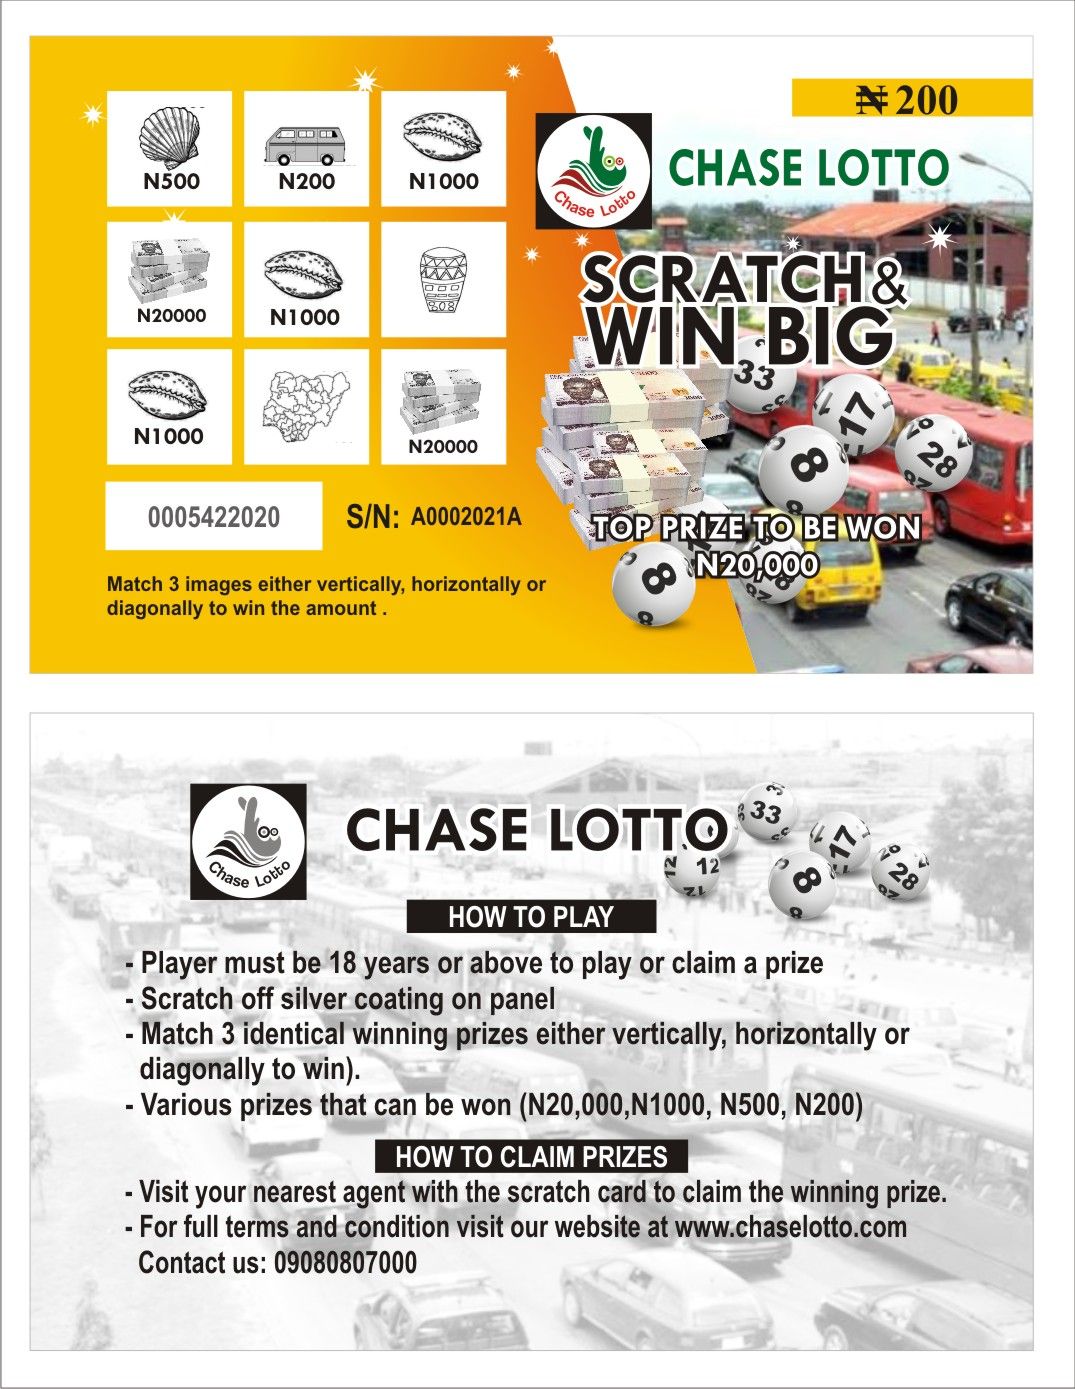 CALL CHINEDU ON 09022536974 TO PRINT LOTTERY CARDS, SPORT BETTING CARDS, RAFFLE TICKETS ETC